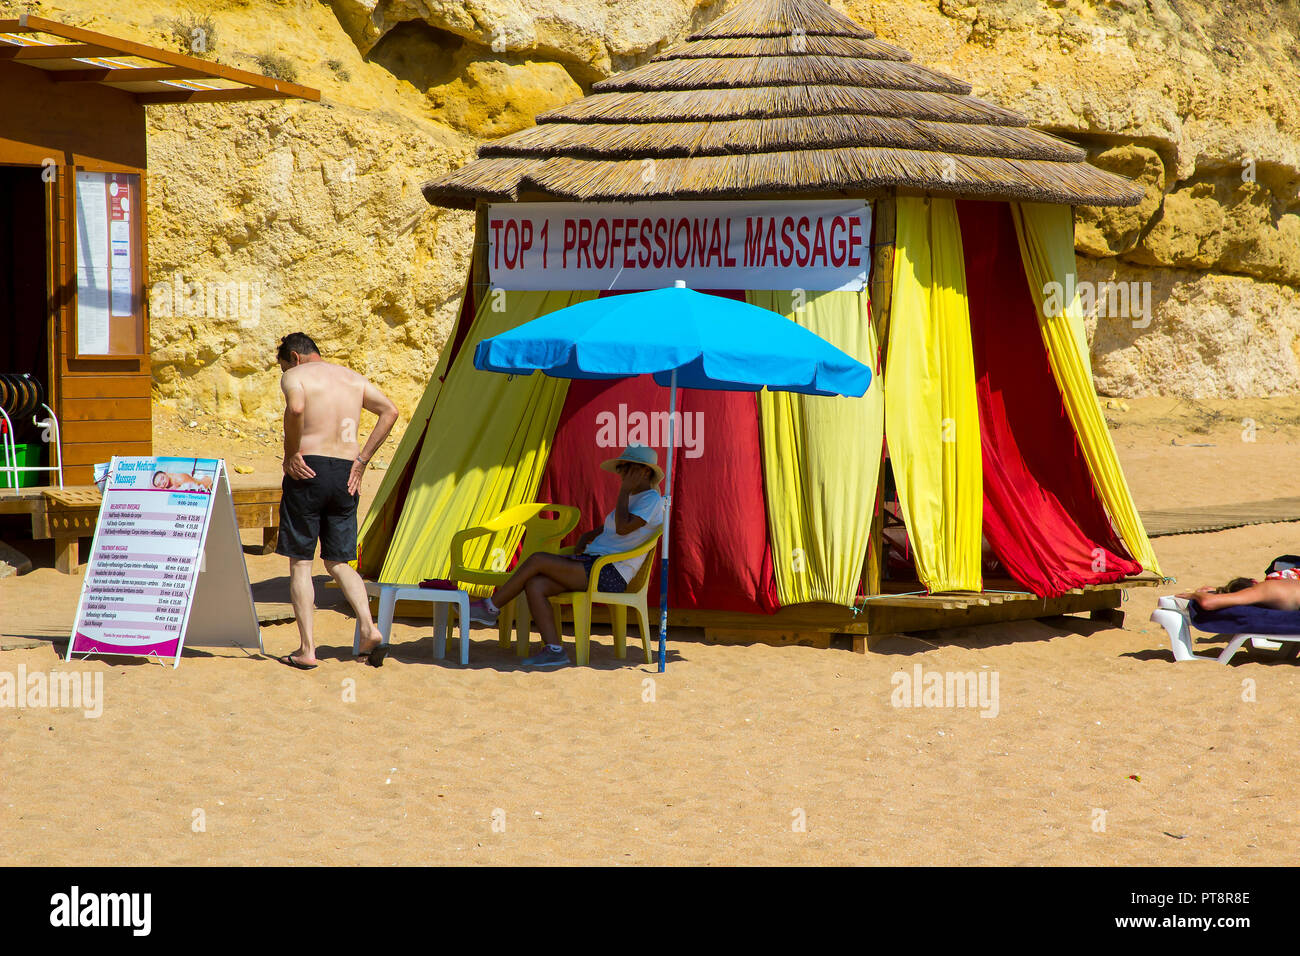 28 September 2018 A professional beach massage tent on the Praia Do Inatel Beach near the Old Town Albuferia Portugal on a hot sunny day Stock Photo